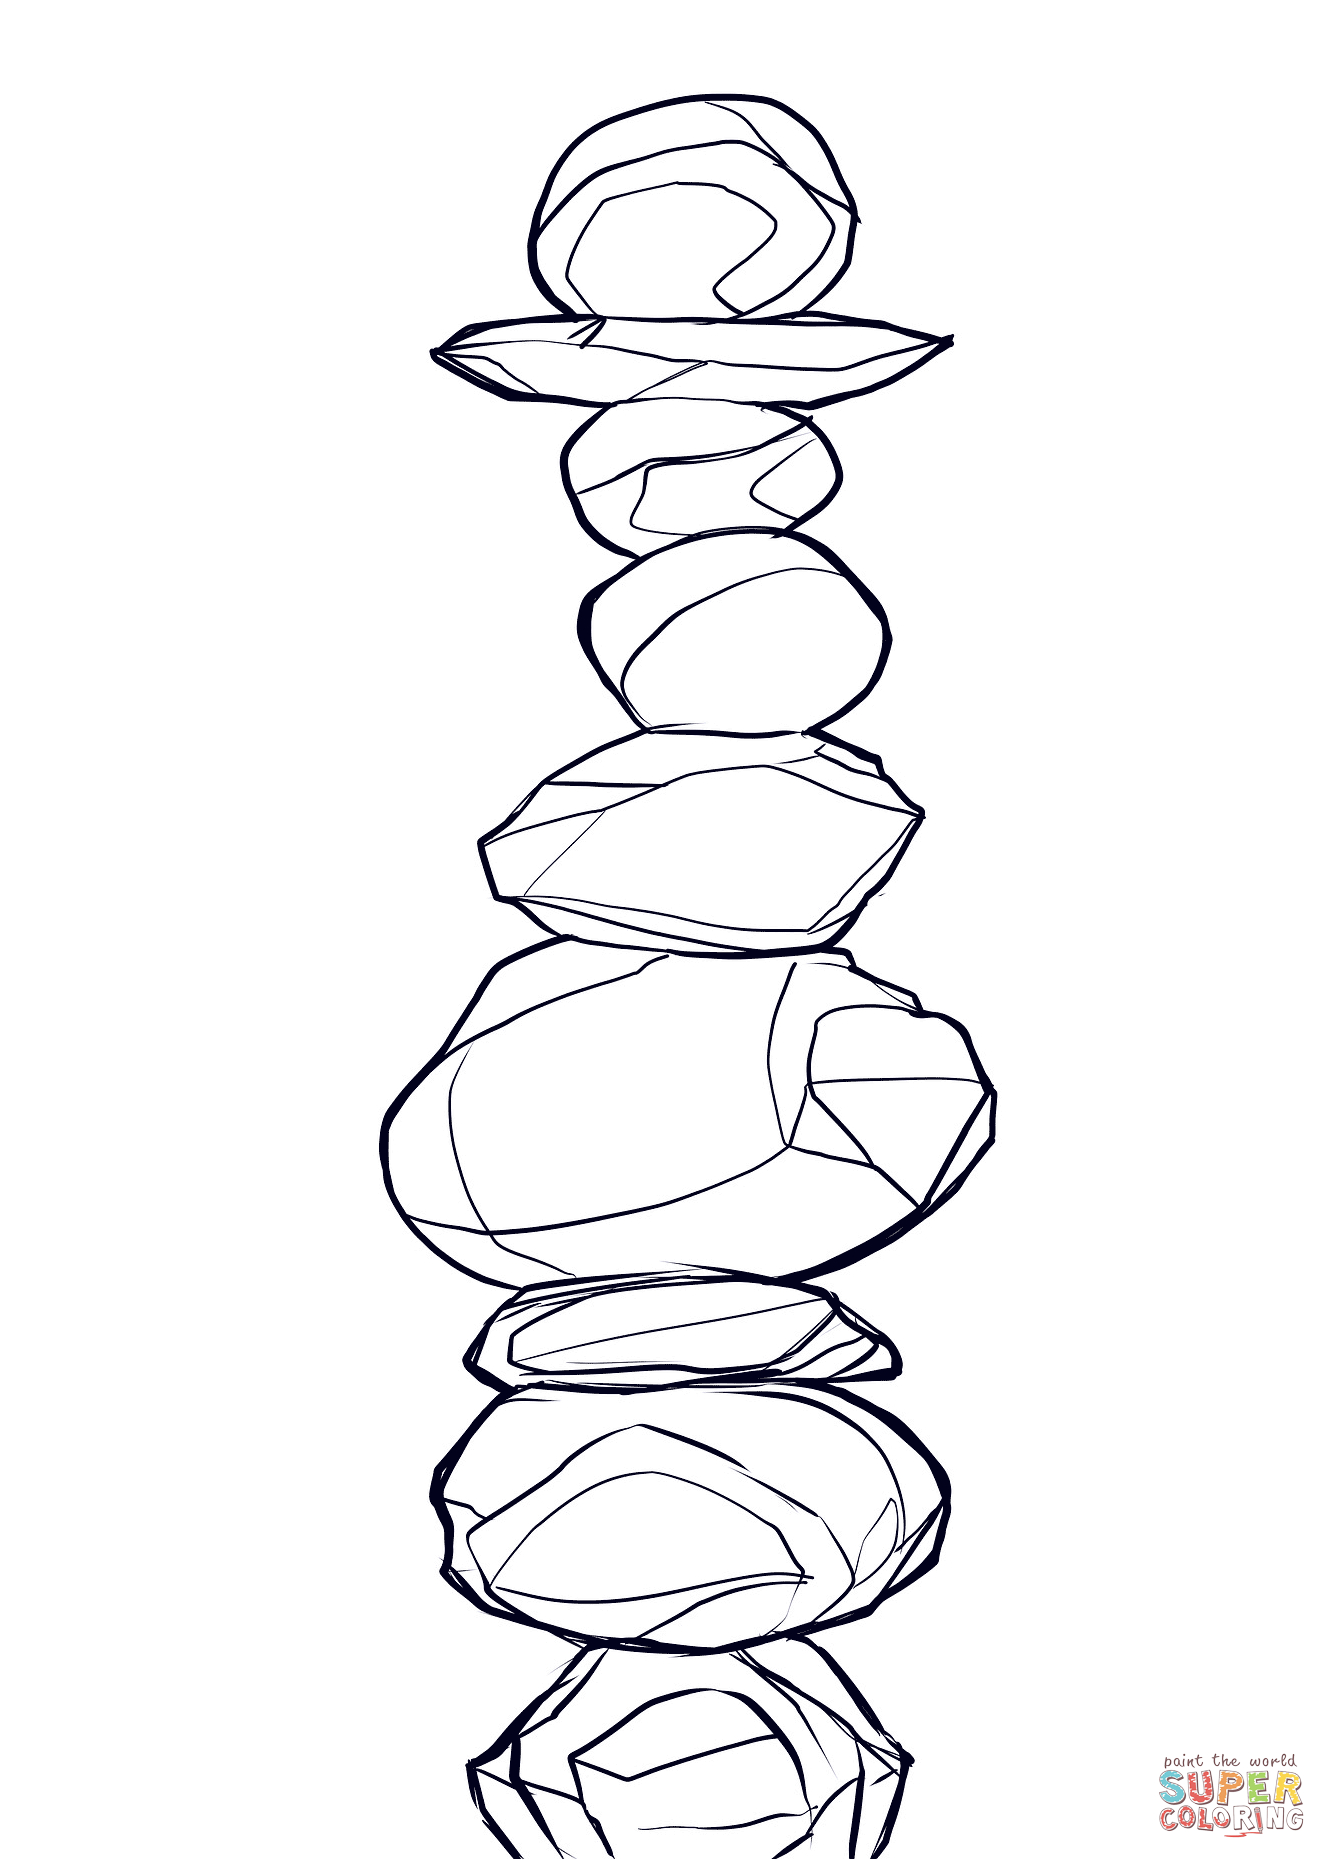 Rock Coloring Page Balanced Rocks Coloring Page Free Printable Coloring Pages